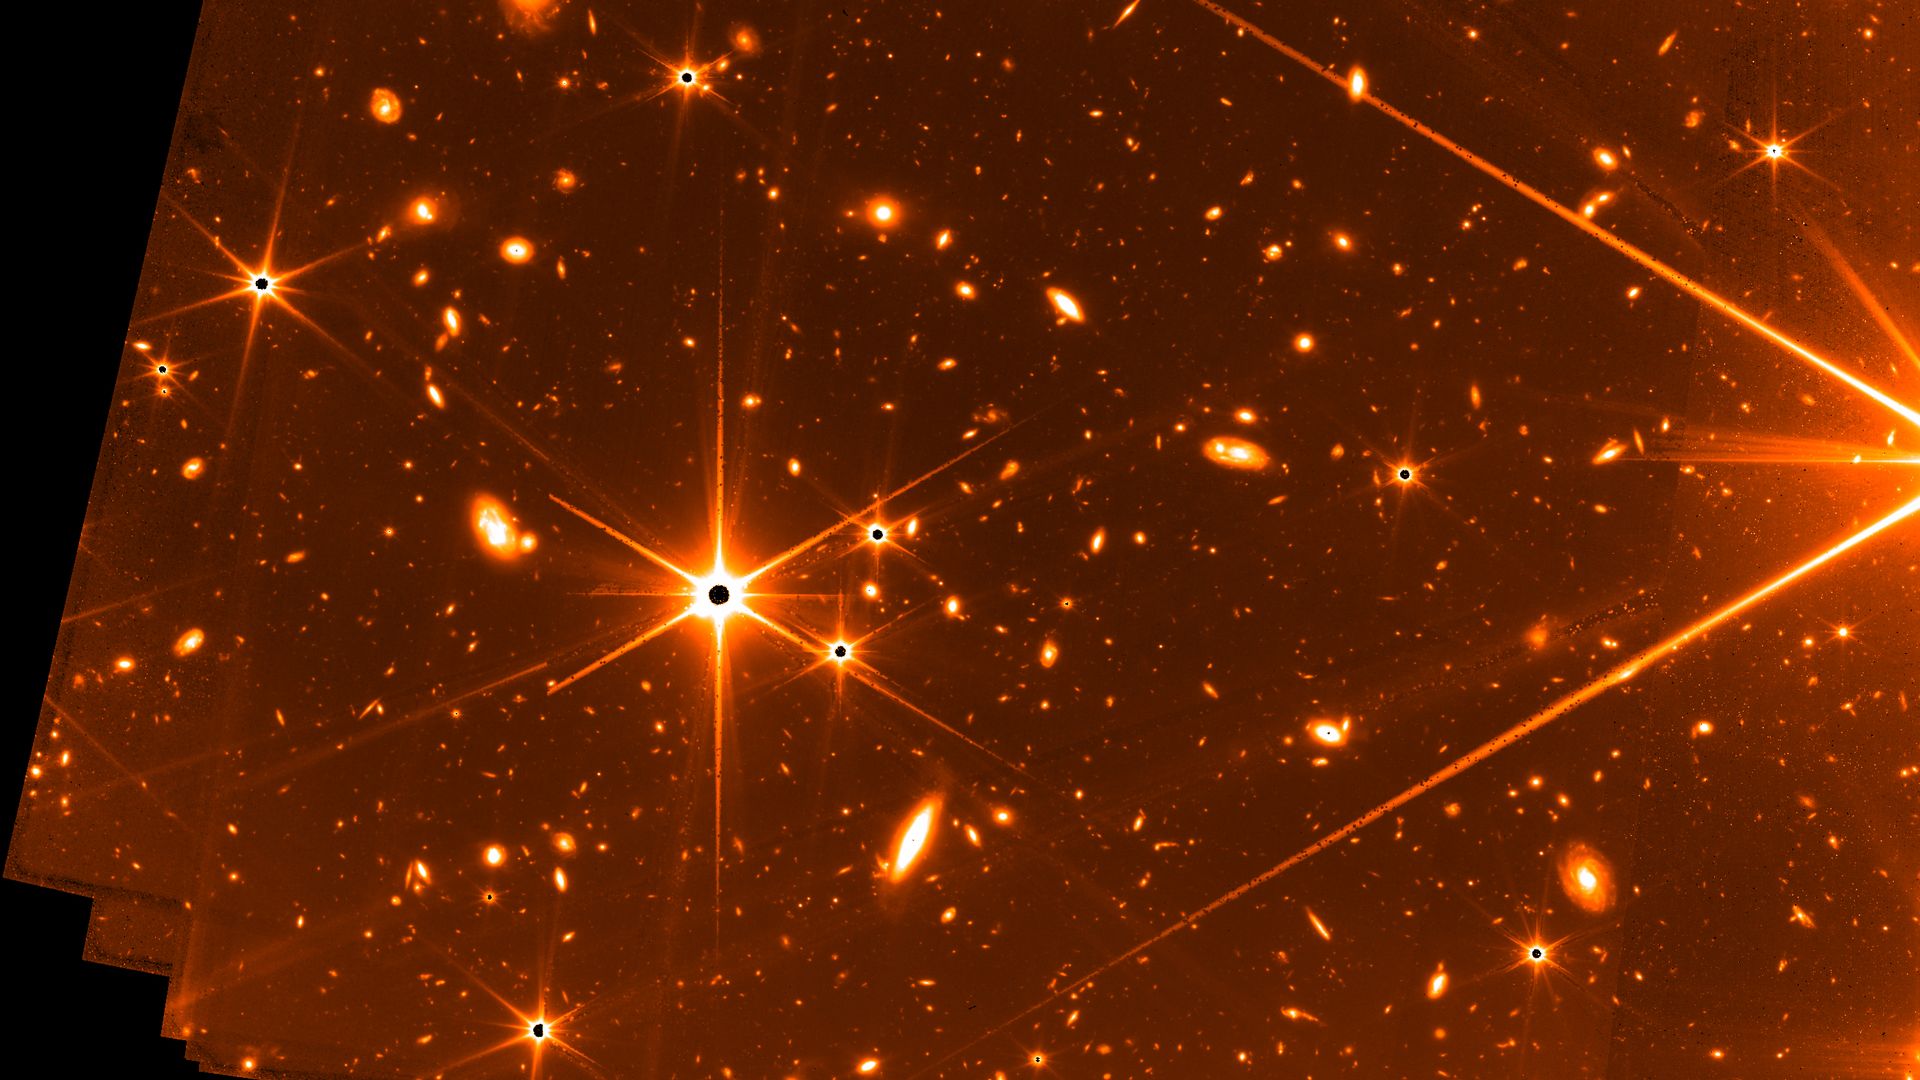 A James Webb Space Telescope test imaged produced in May.